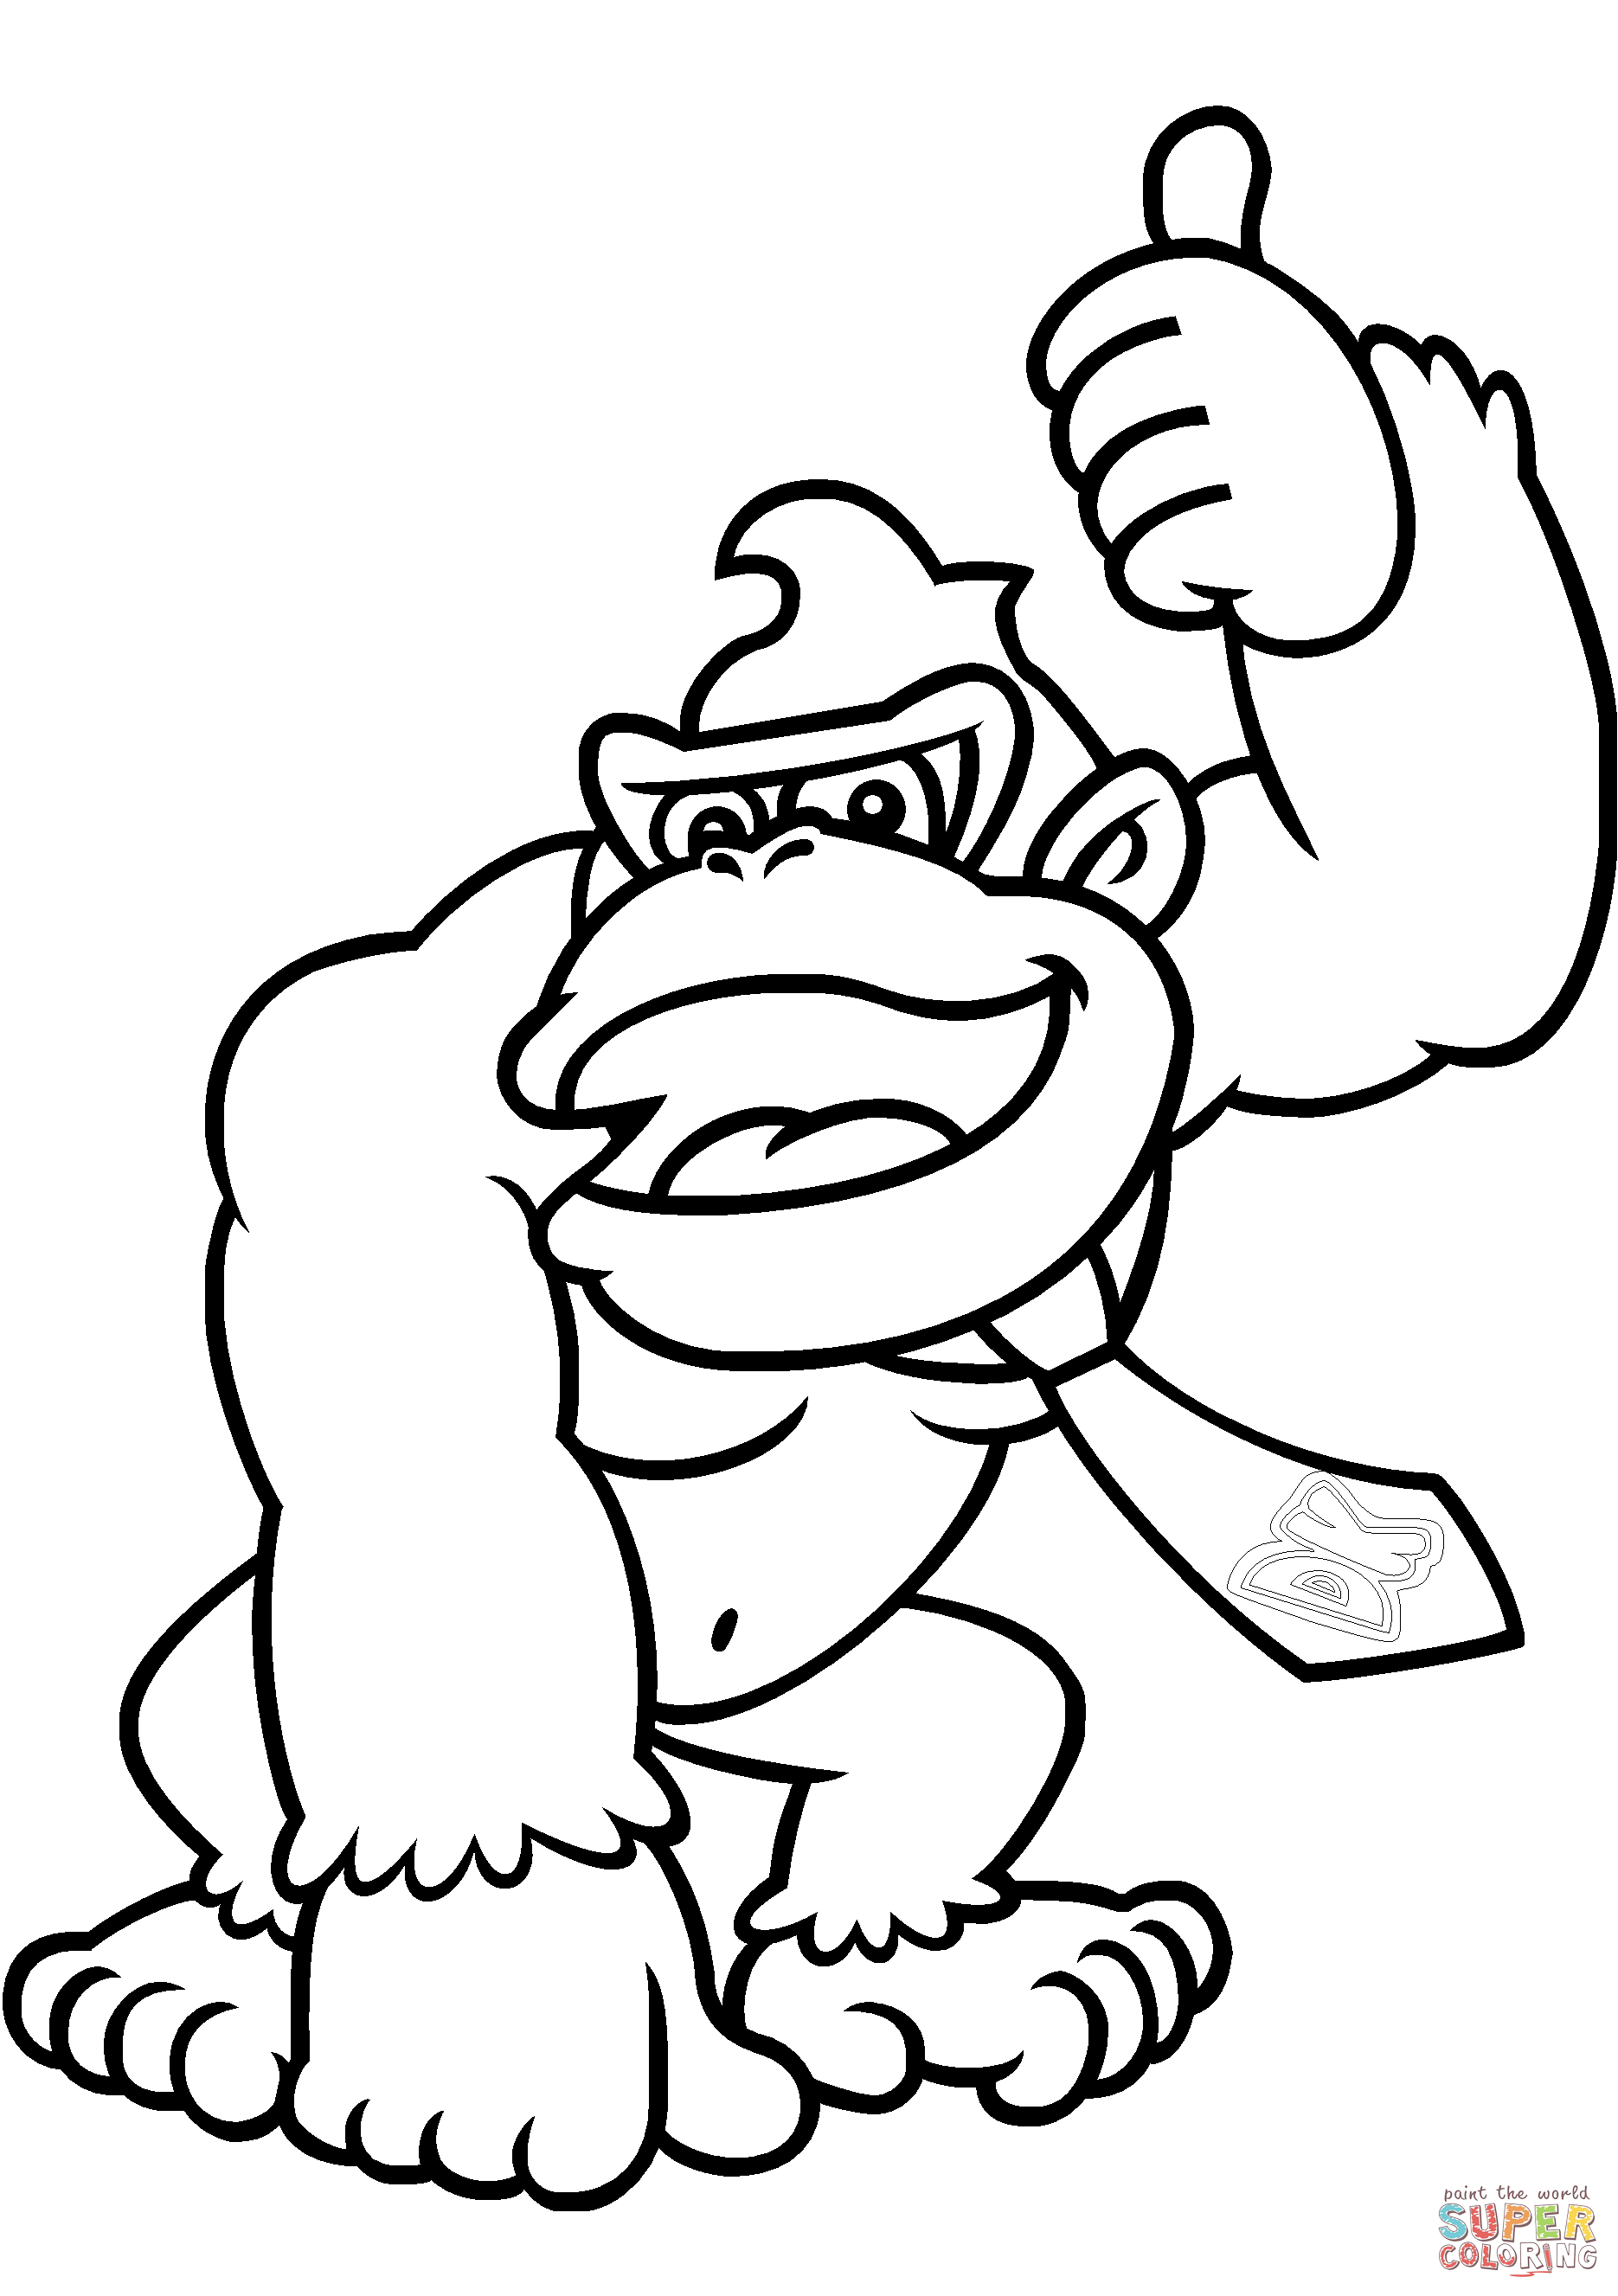 Donkey Kong Coloring Pages To Print   Resume Format Download Pdf ...